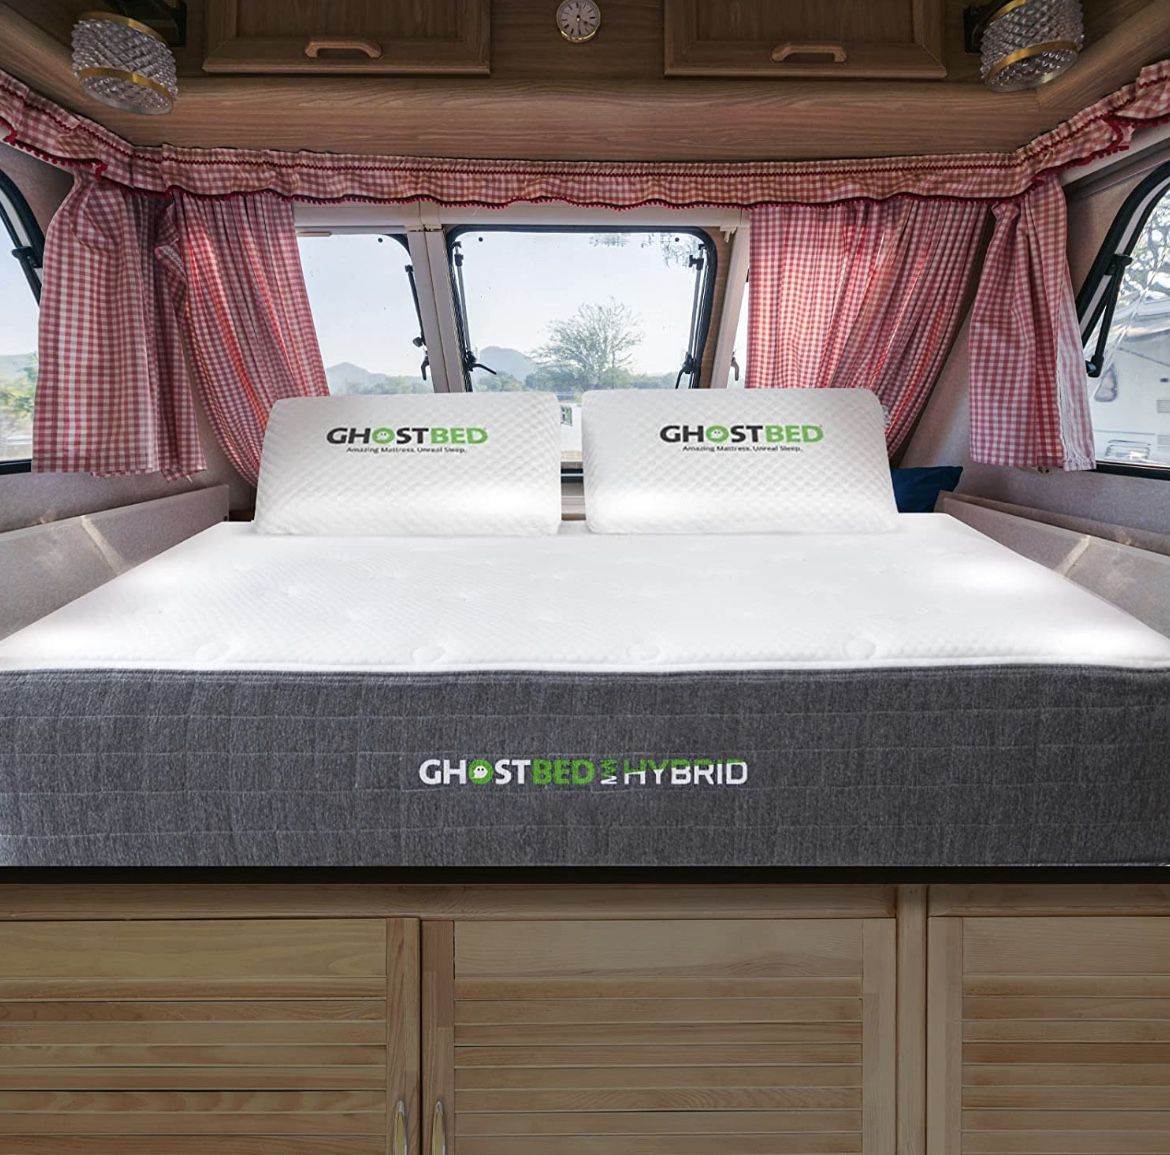 RV Short King Ghostbed Like New 80 % Off 